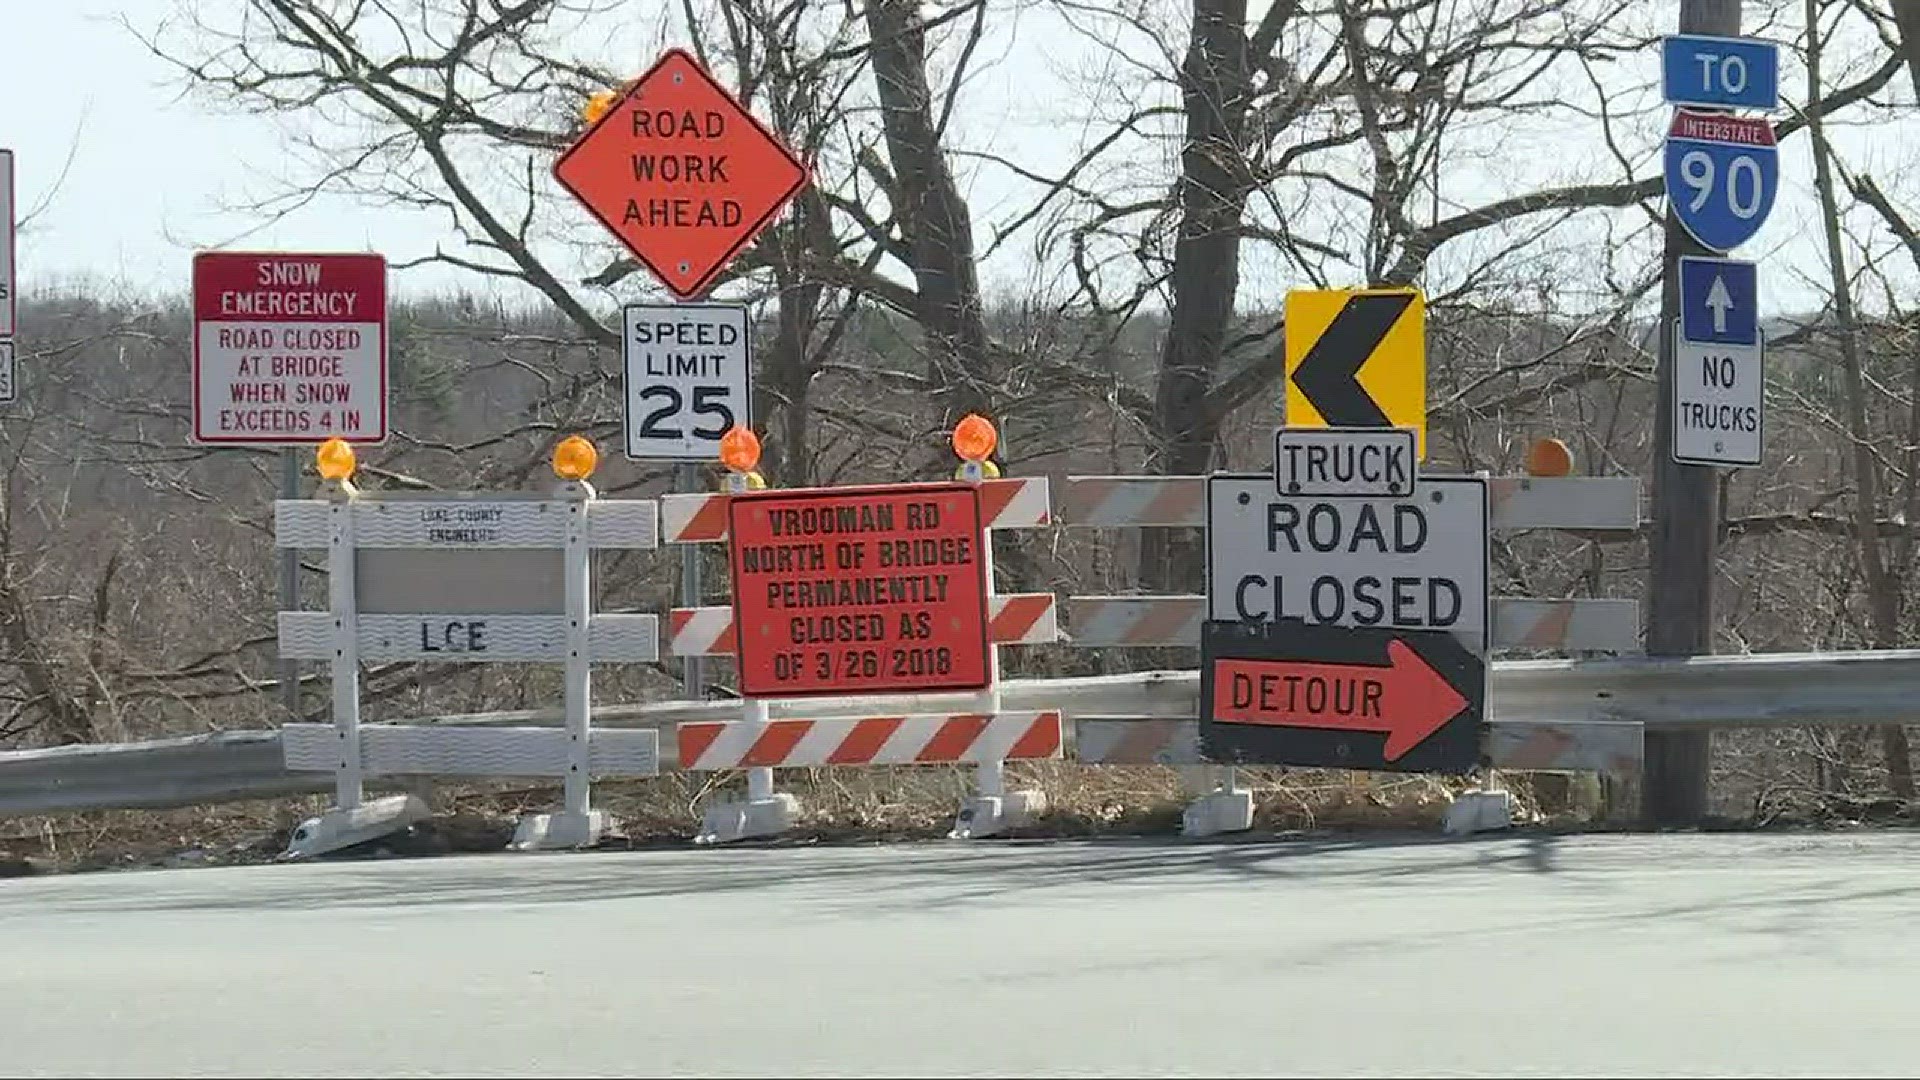 March 23, 2018: As a portion of Vrooman Road closes permanently in Lake County, local drivers are looking for the best detour options.